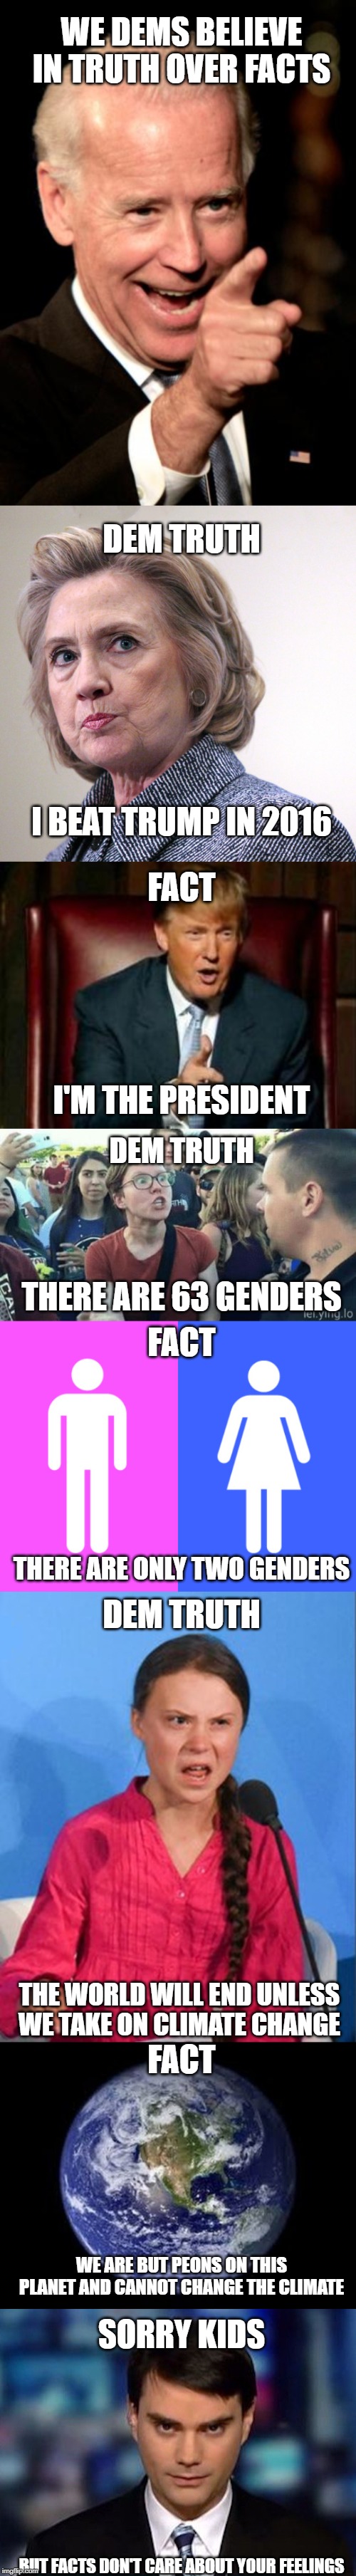 Democrat's "Truth" Destroyed With Facts & Logic! | WE DEMS BELIEVE IN TRUTH OVER FACTS; DEM TRUTH; I BEAT TRUMP IN 2016; FACT; I'M THE PRESIDENT; DEM TRUTH; THERE ARE 63 GENDERS; FACT; THERE ARE ONLY TWO GENDERS; DEM TRUTH; THE WORLD WILL END UNLESS WE TAKE ON CLIMATE CHANGE; FACT; WE ARE BUT PEONS ON THIS PLANET AND CANNOT CHANGE THE CLIMATE; SORRY KIDS; BUT FACTS DON'T CARE ABOUT YOUR FEELINGS | image tagged in memes,smilin biden,donald trump,hillary clinton pissed,assume gender,ben shapiro | made w/ Imgflip meme maker